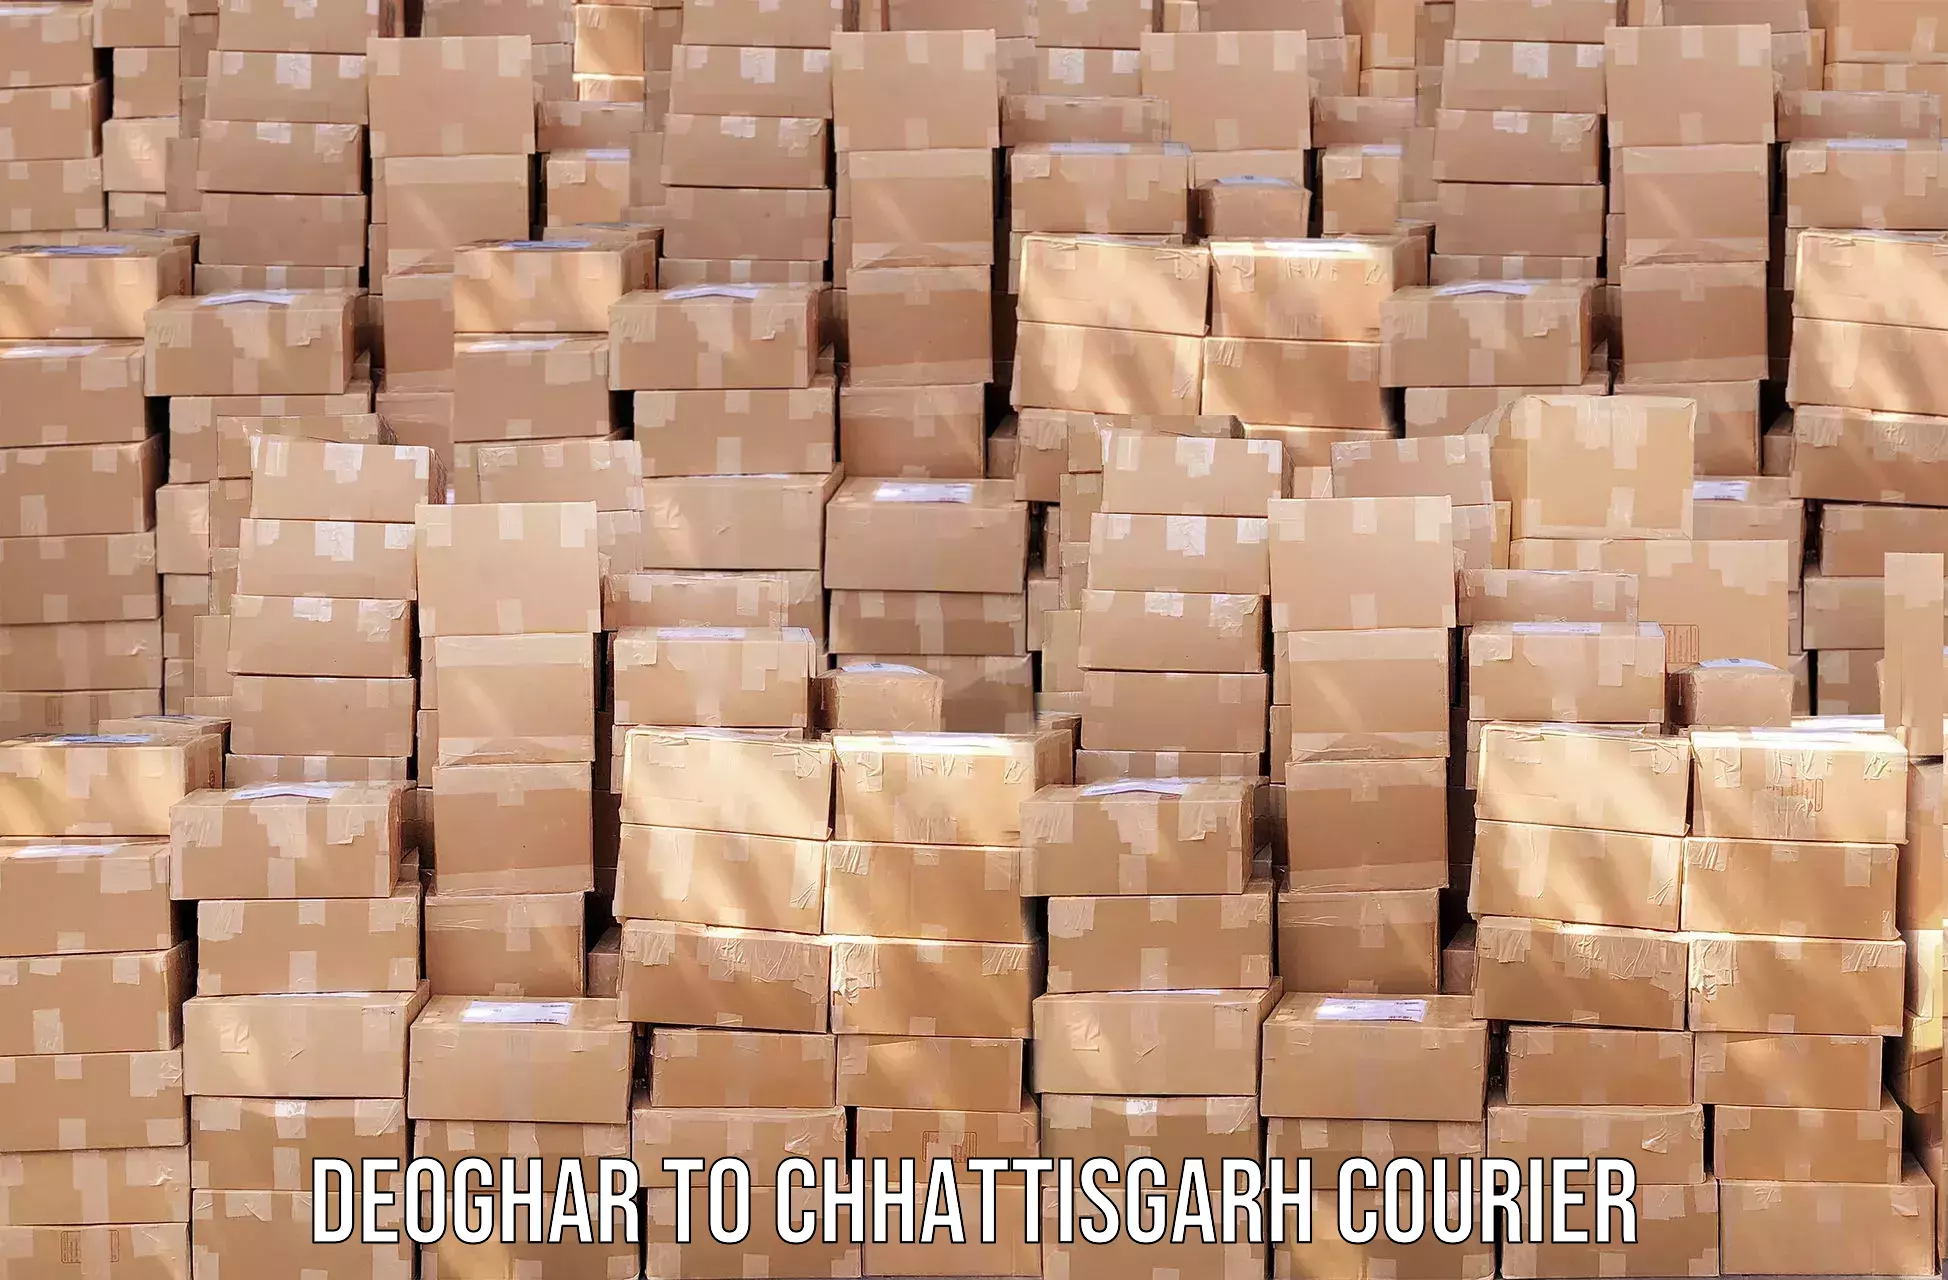 Efficient parcel tracking in Deoghar to Dhamtari